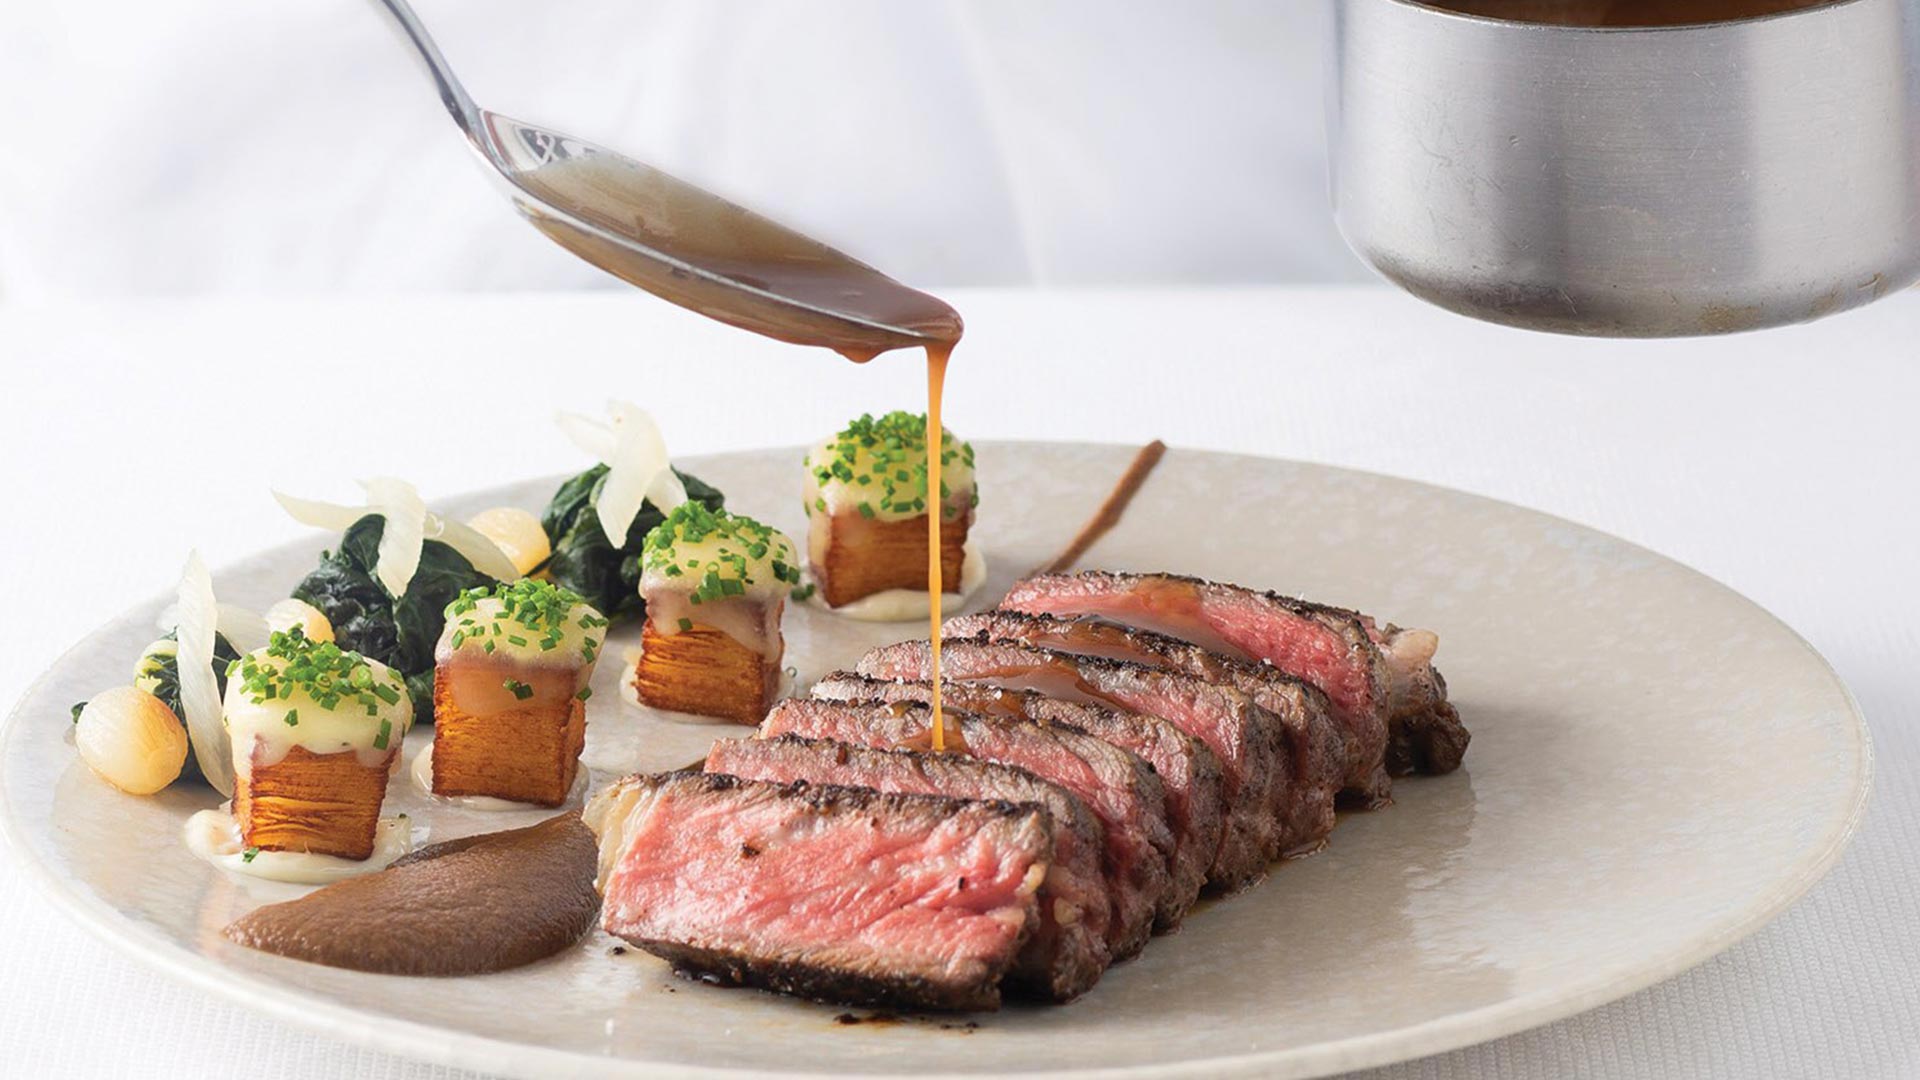 Prime beef steak, a dish served at Spago Dining Room during a private event in Singapore